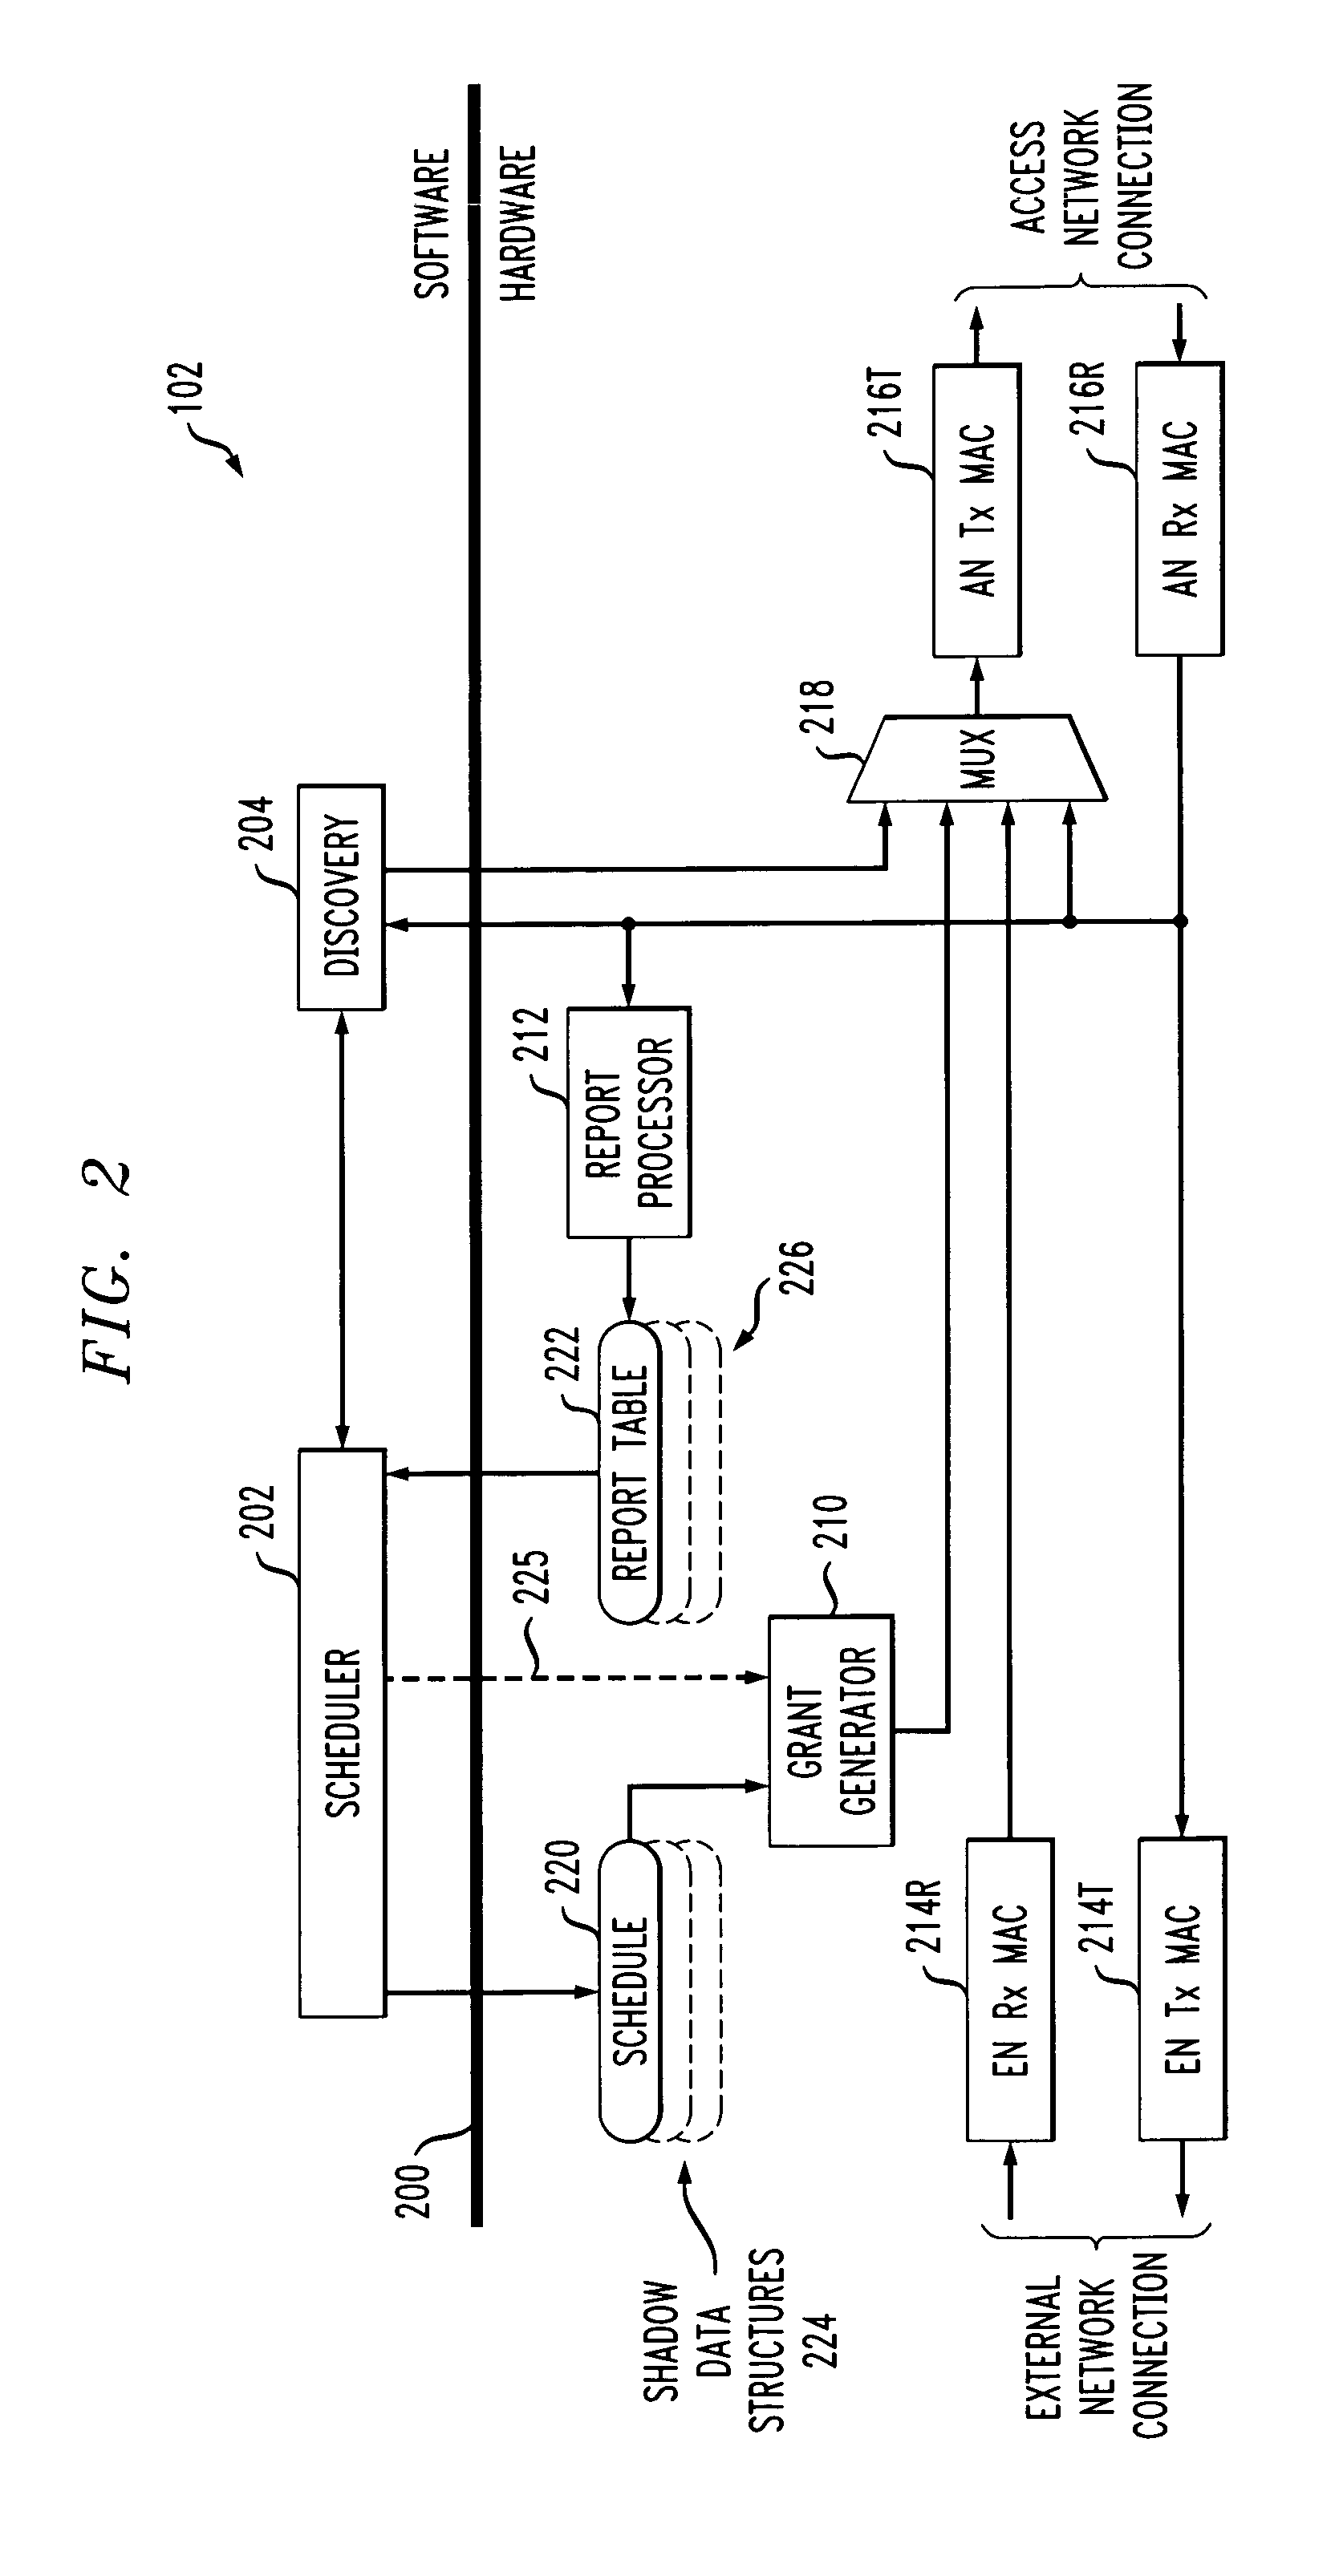 Software-hardware partitioning of a scheduled medium-access protocol